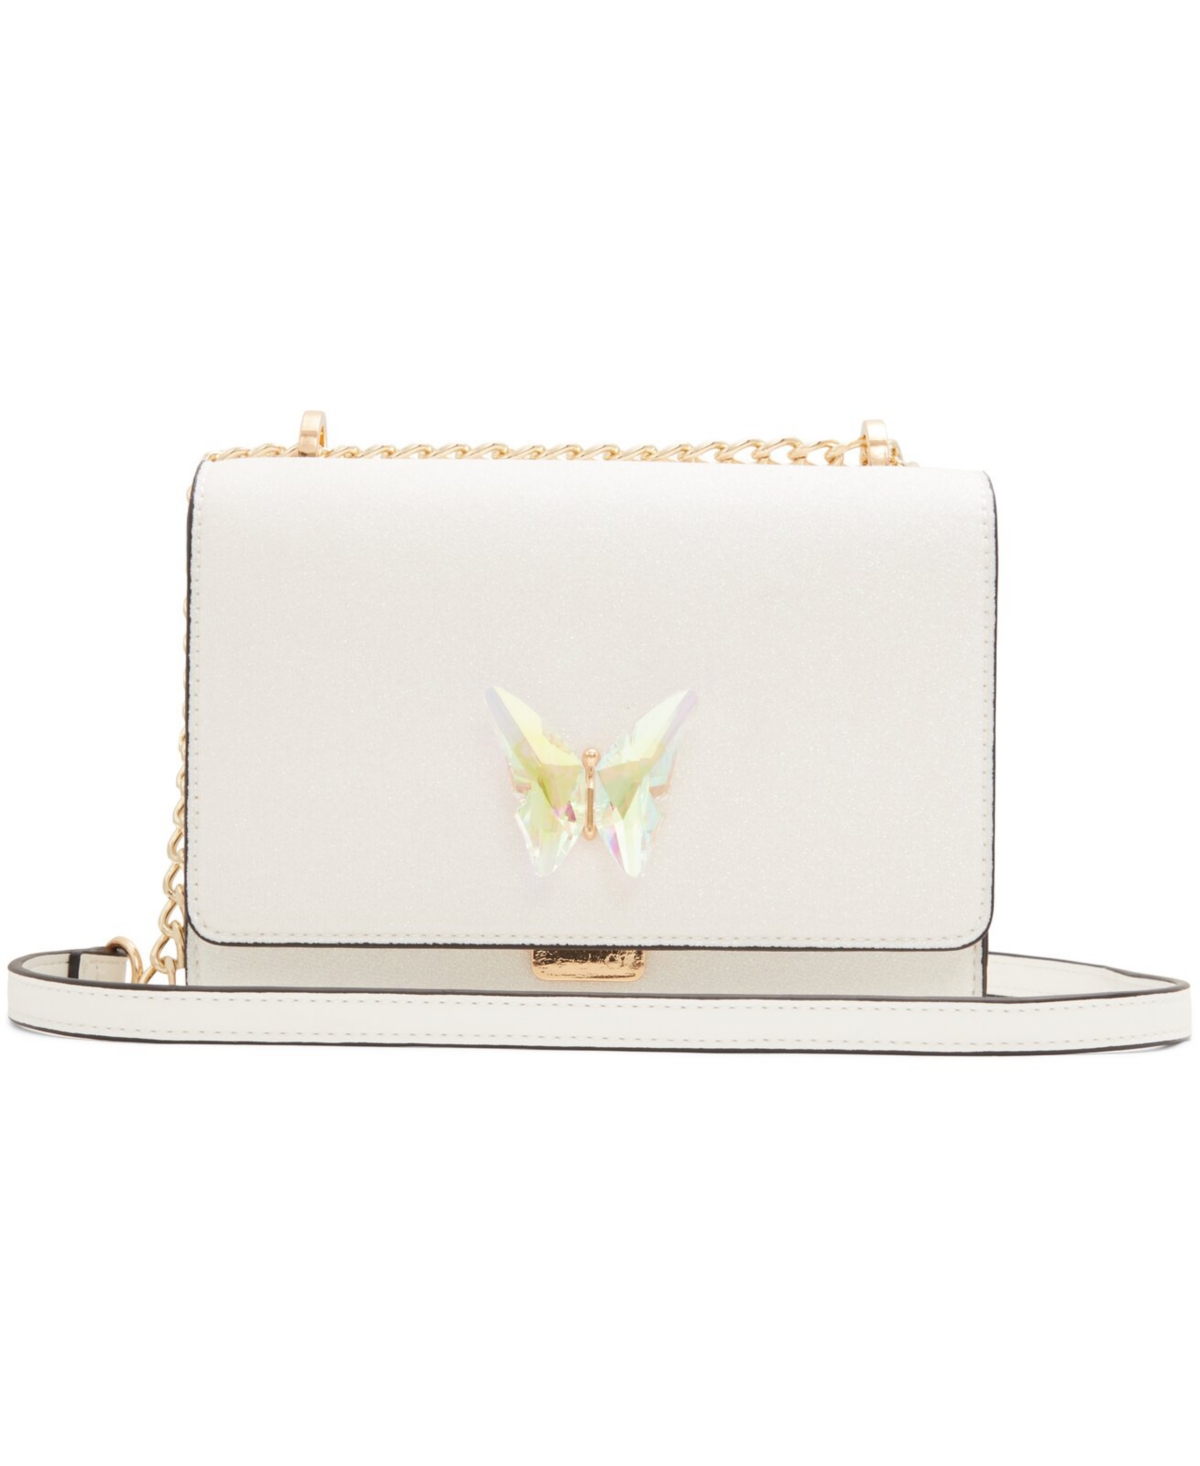 Karlowaa Synthetic Crossbody - Other White